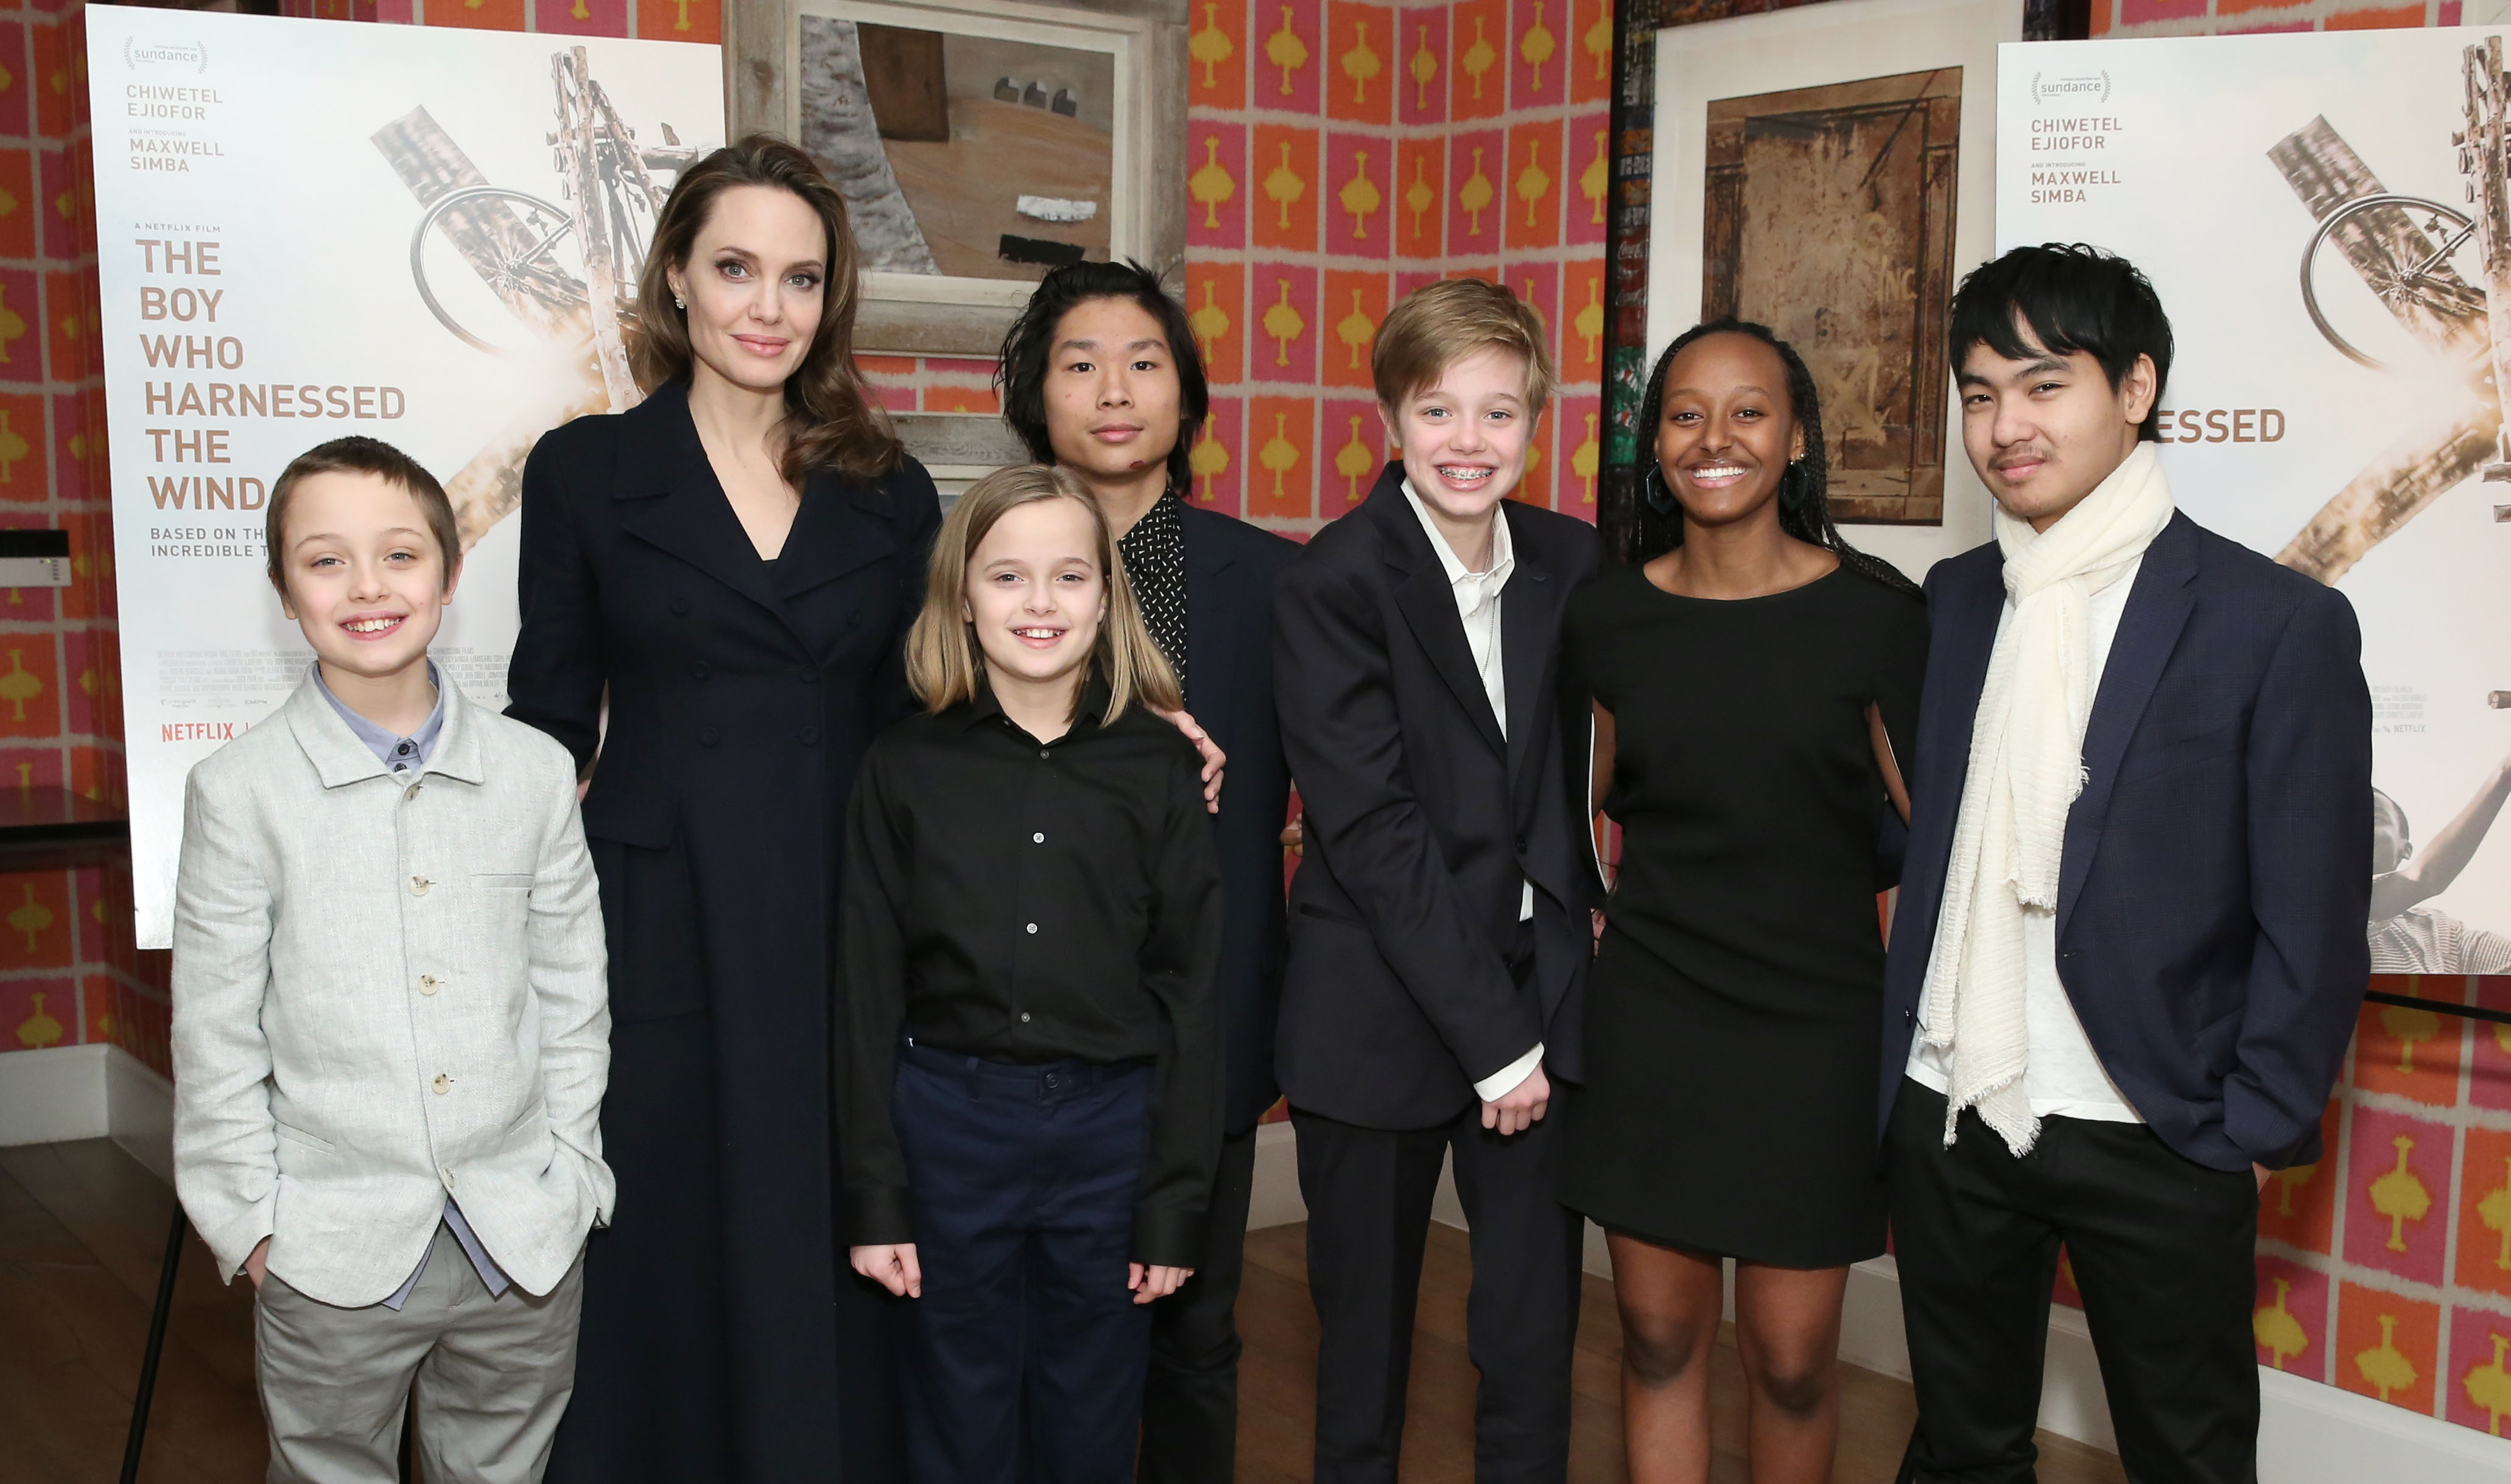 Angelina Jolie with Shiloh, Zahara, Maddox, Knox, Pax, and Vivienne Jolie-Pitt at the special screening of "The Boy Who Harnessed The Wind" in New York City on February 25, 2019 | Source: Getty Images